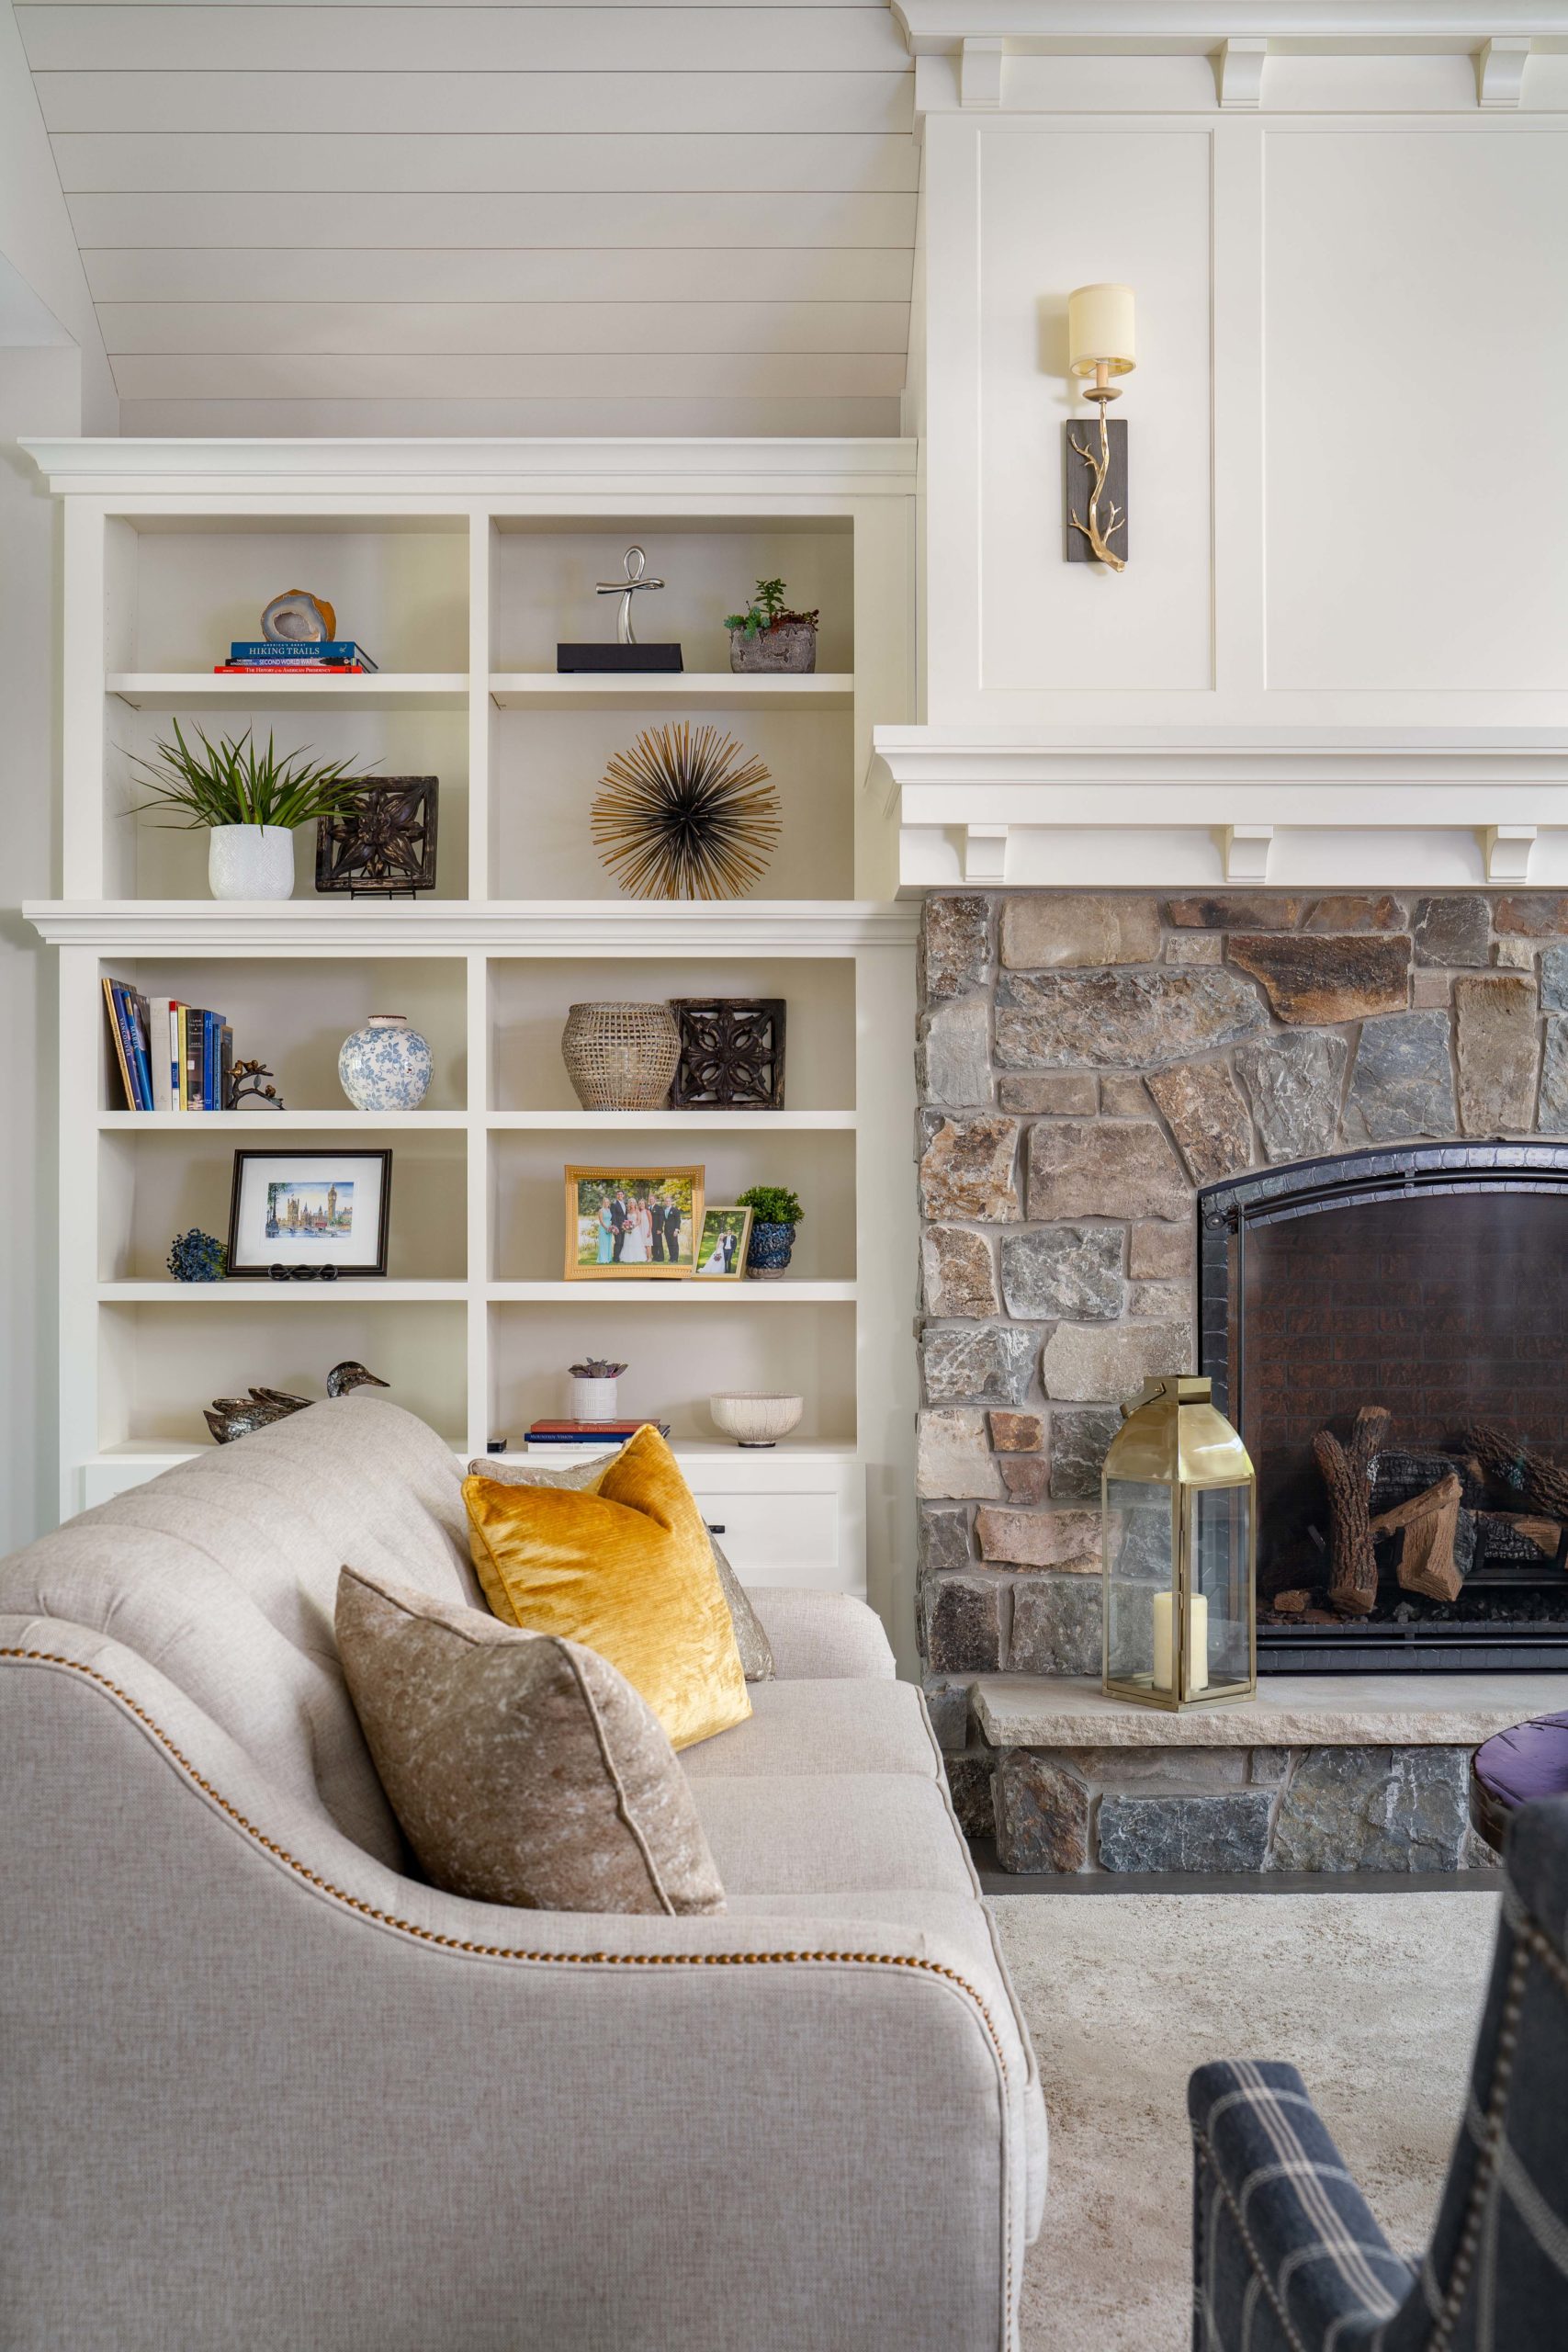 The Lake Escape custom home remodel transformed a living room with a fireplace and bookshelves into a cozy retreat.